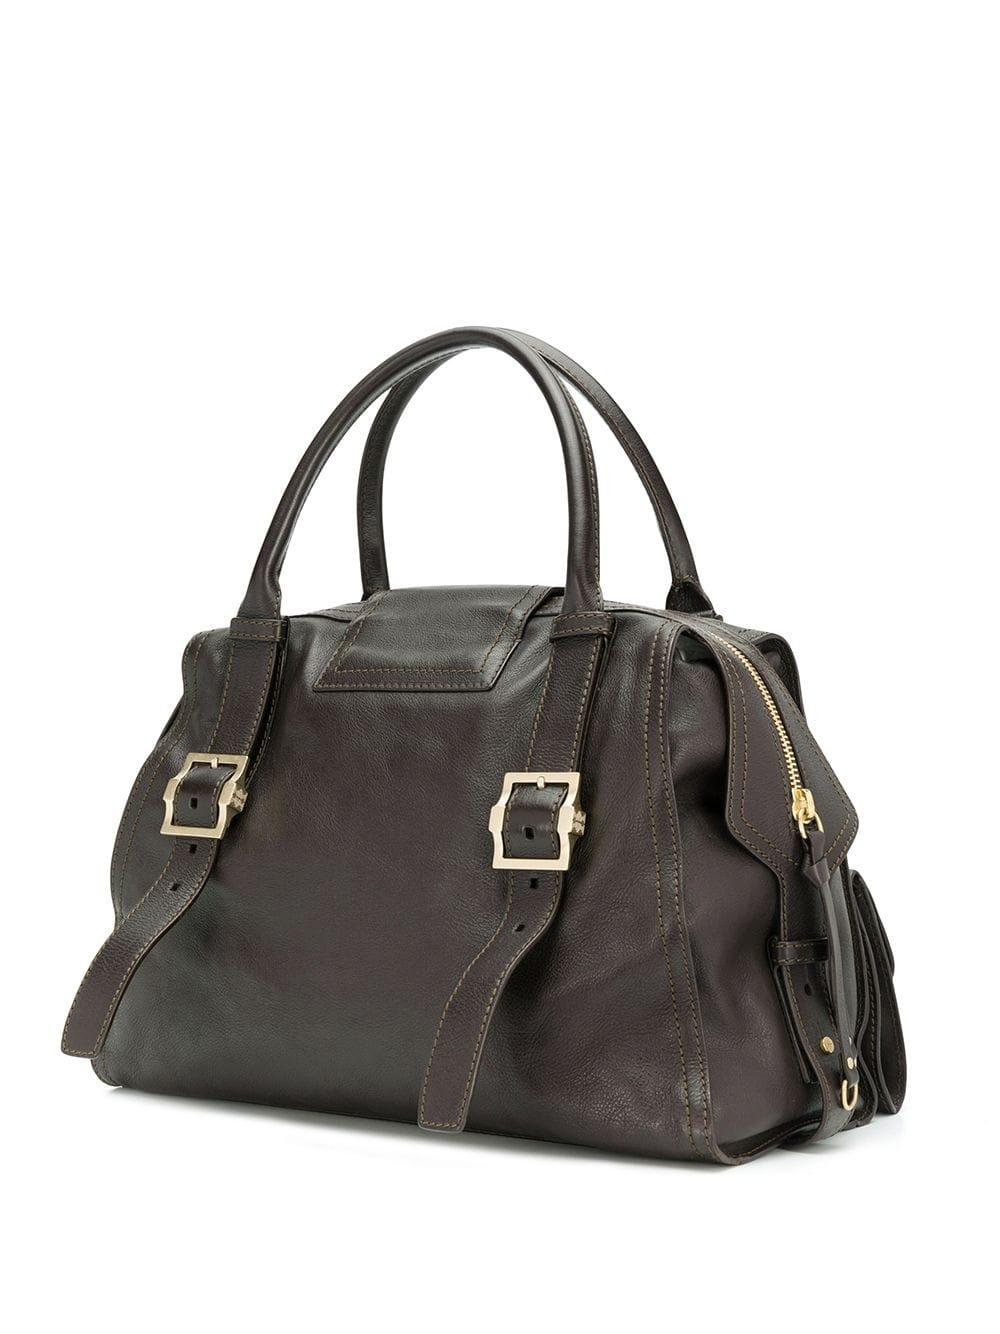 Crafted in dark brown leather, This pre-owned accessory by Givenchy is a sophisticated yet edgy take on the classic, structured shoulder and a basic essential that's as flexible and study as it is stylish. The medium sized piece is the perfect size